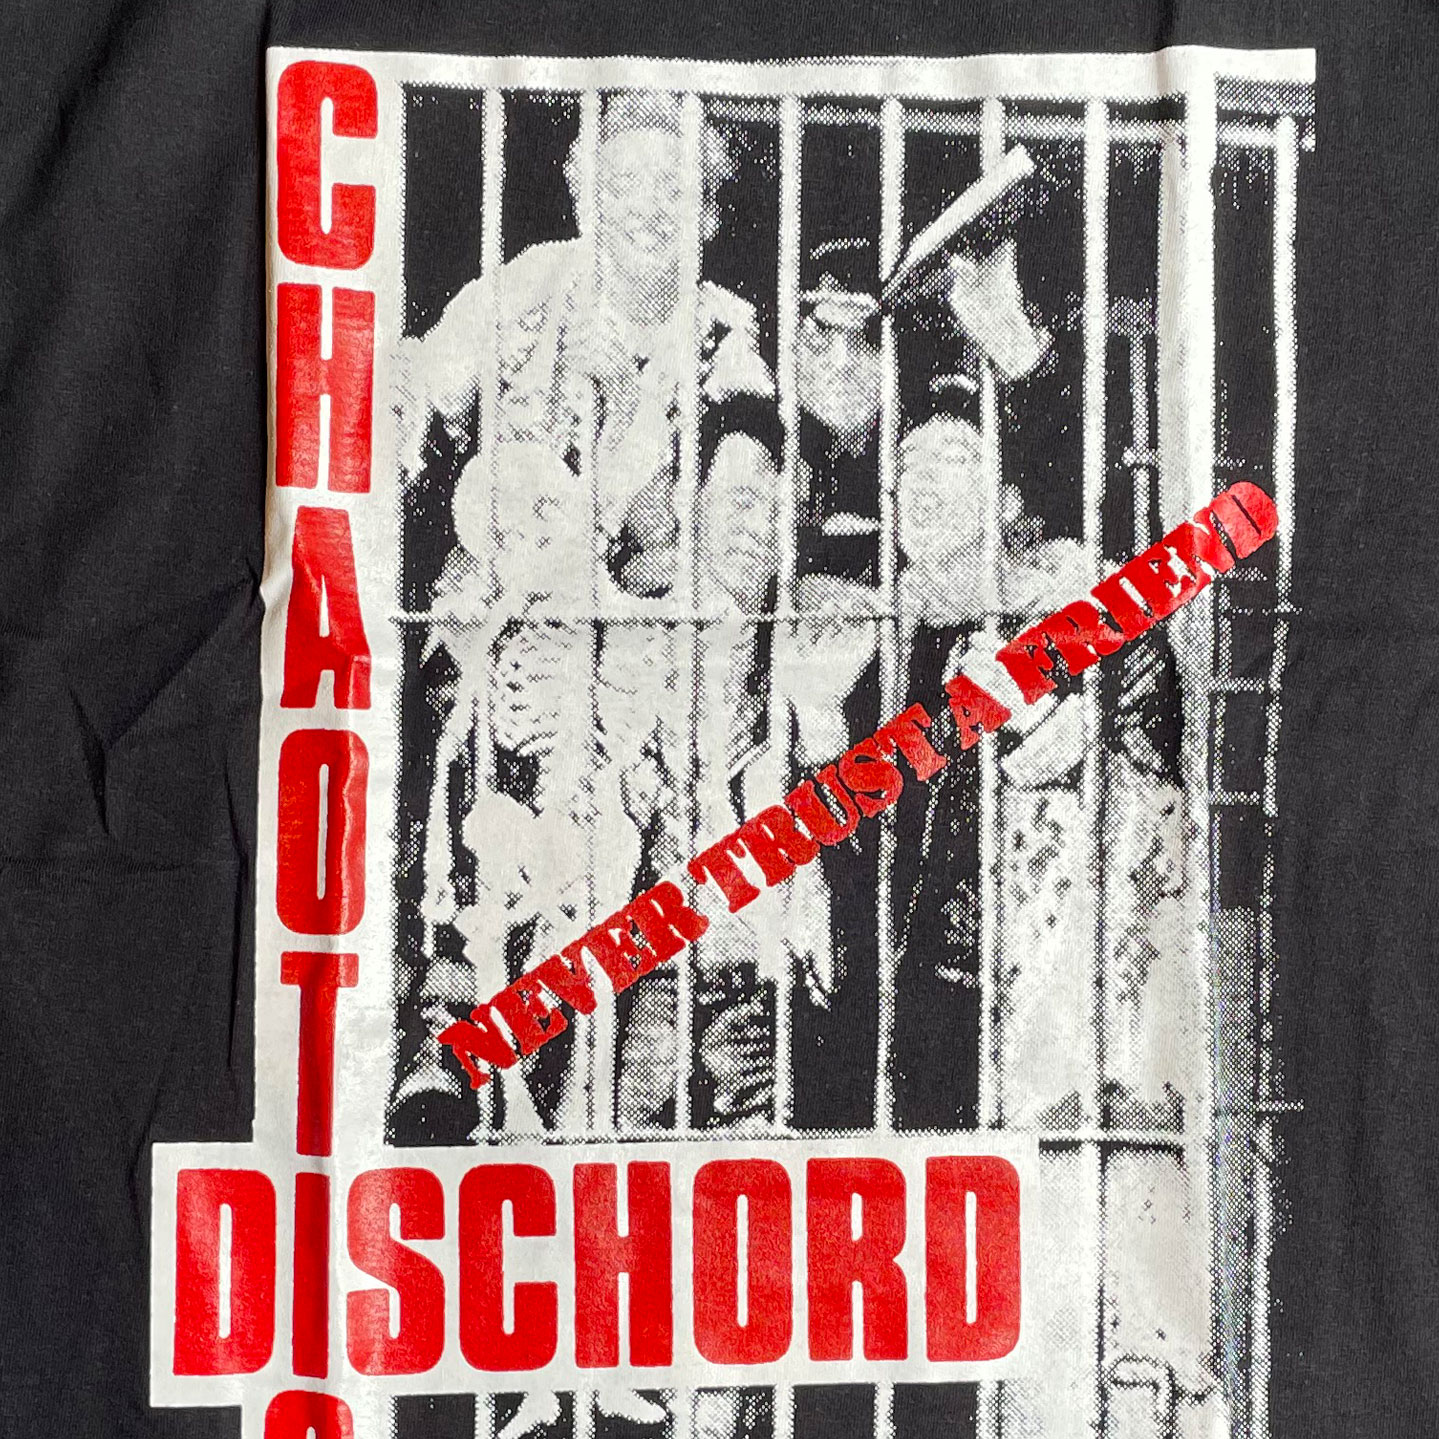 CHAOTIC DISCHORD Tシャツ NEVER TRUST A FRIEND PHOTO